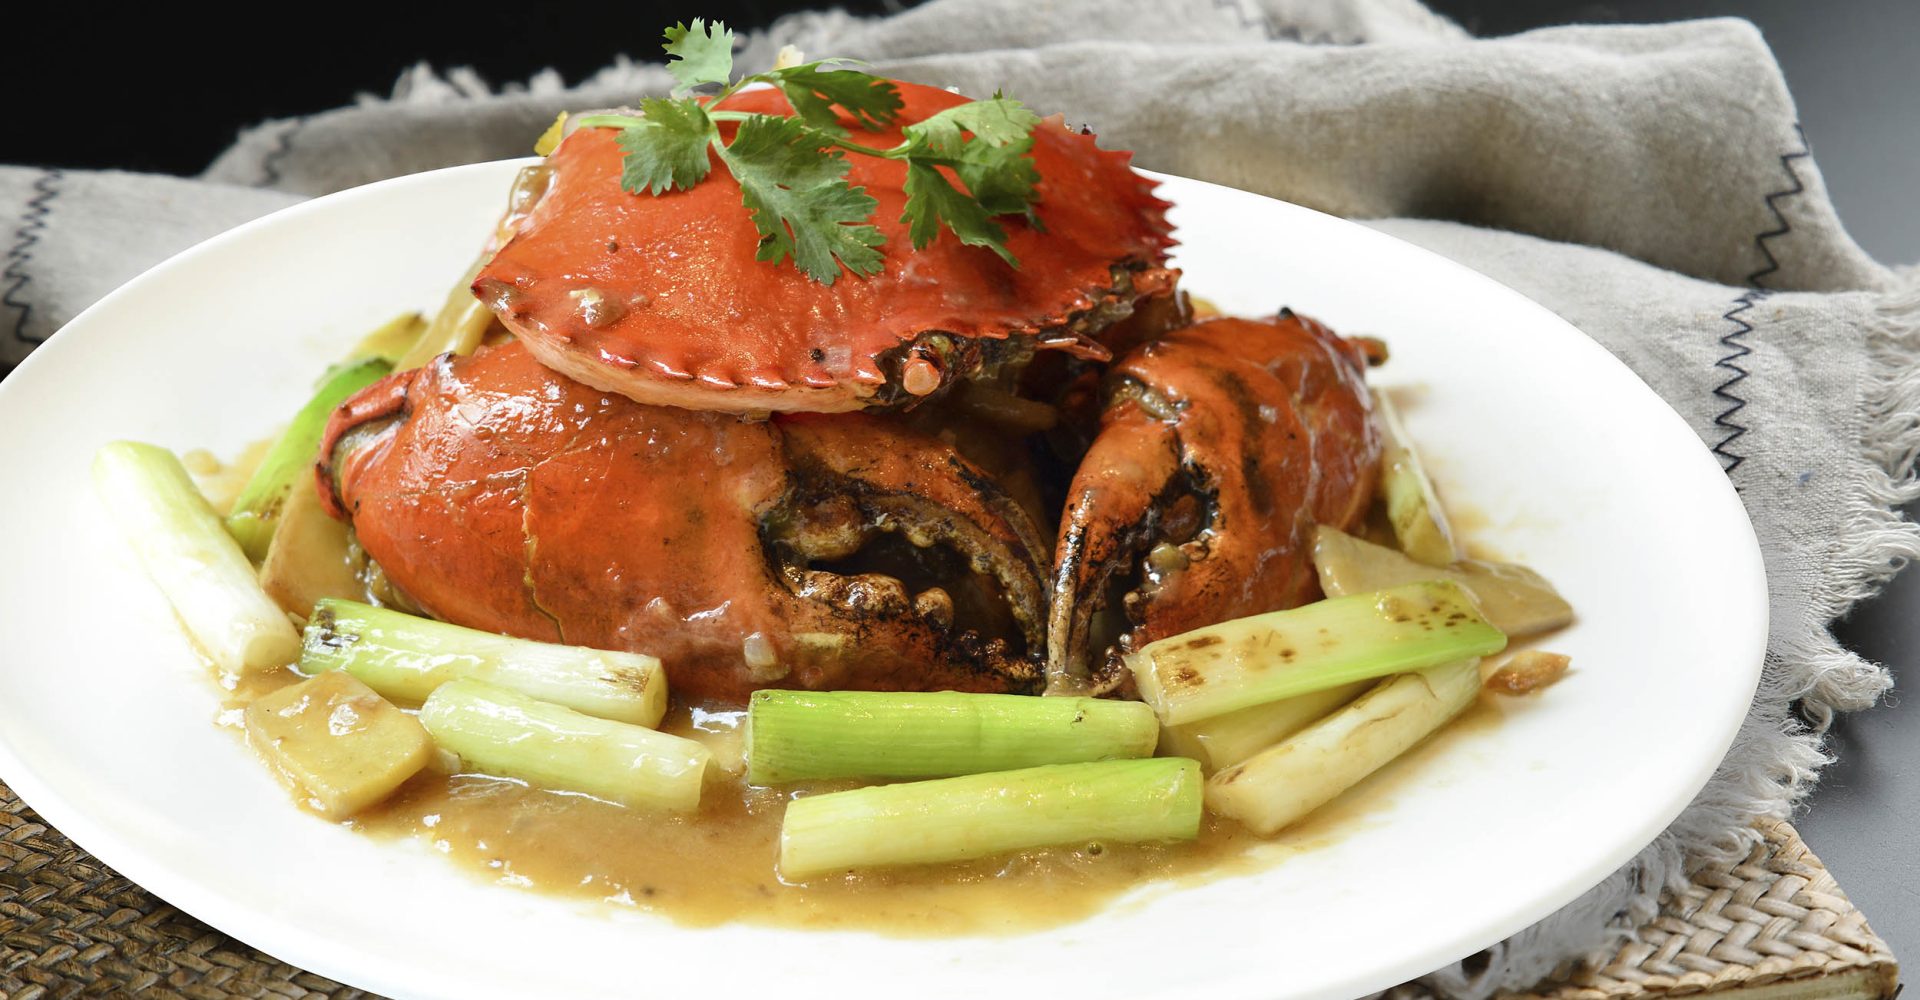 Xiu Live Seafood (crab) - Wok-fried crab with ginger and spring onion